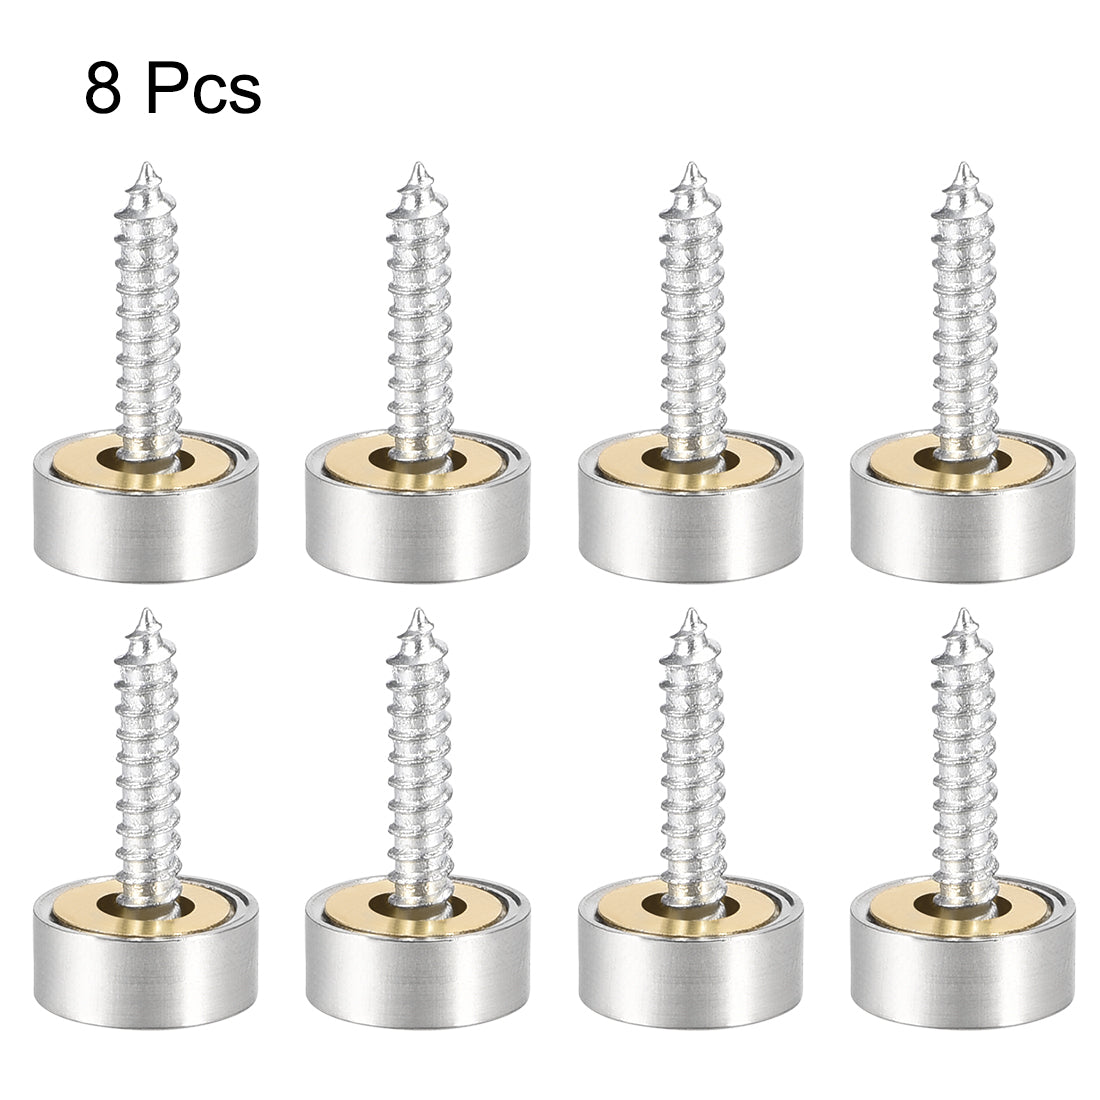 uxcell Uxcell Mirror Screws Decorative Caps Cover Nails Brushed Stainless Steel 12mm 8pcs